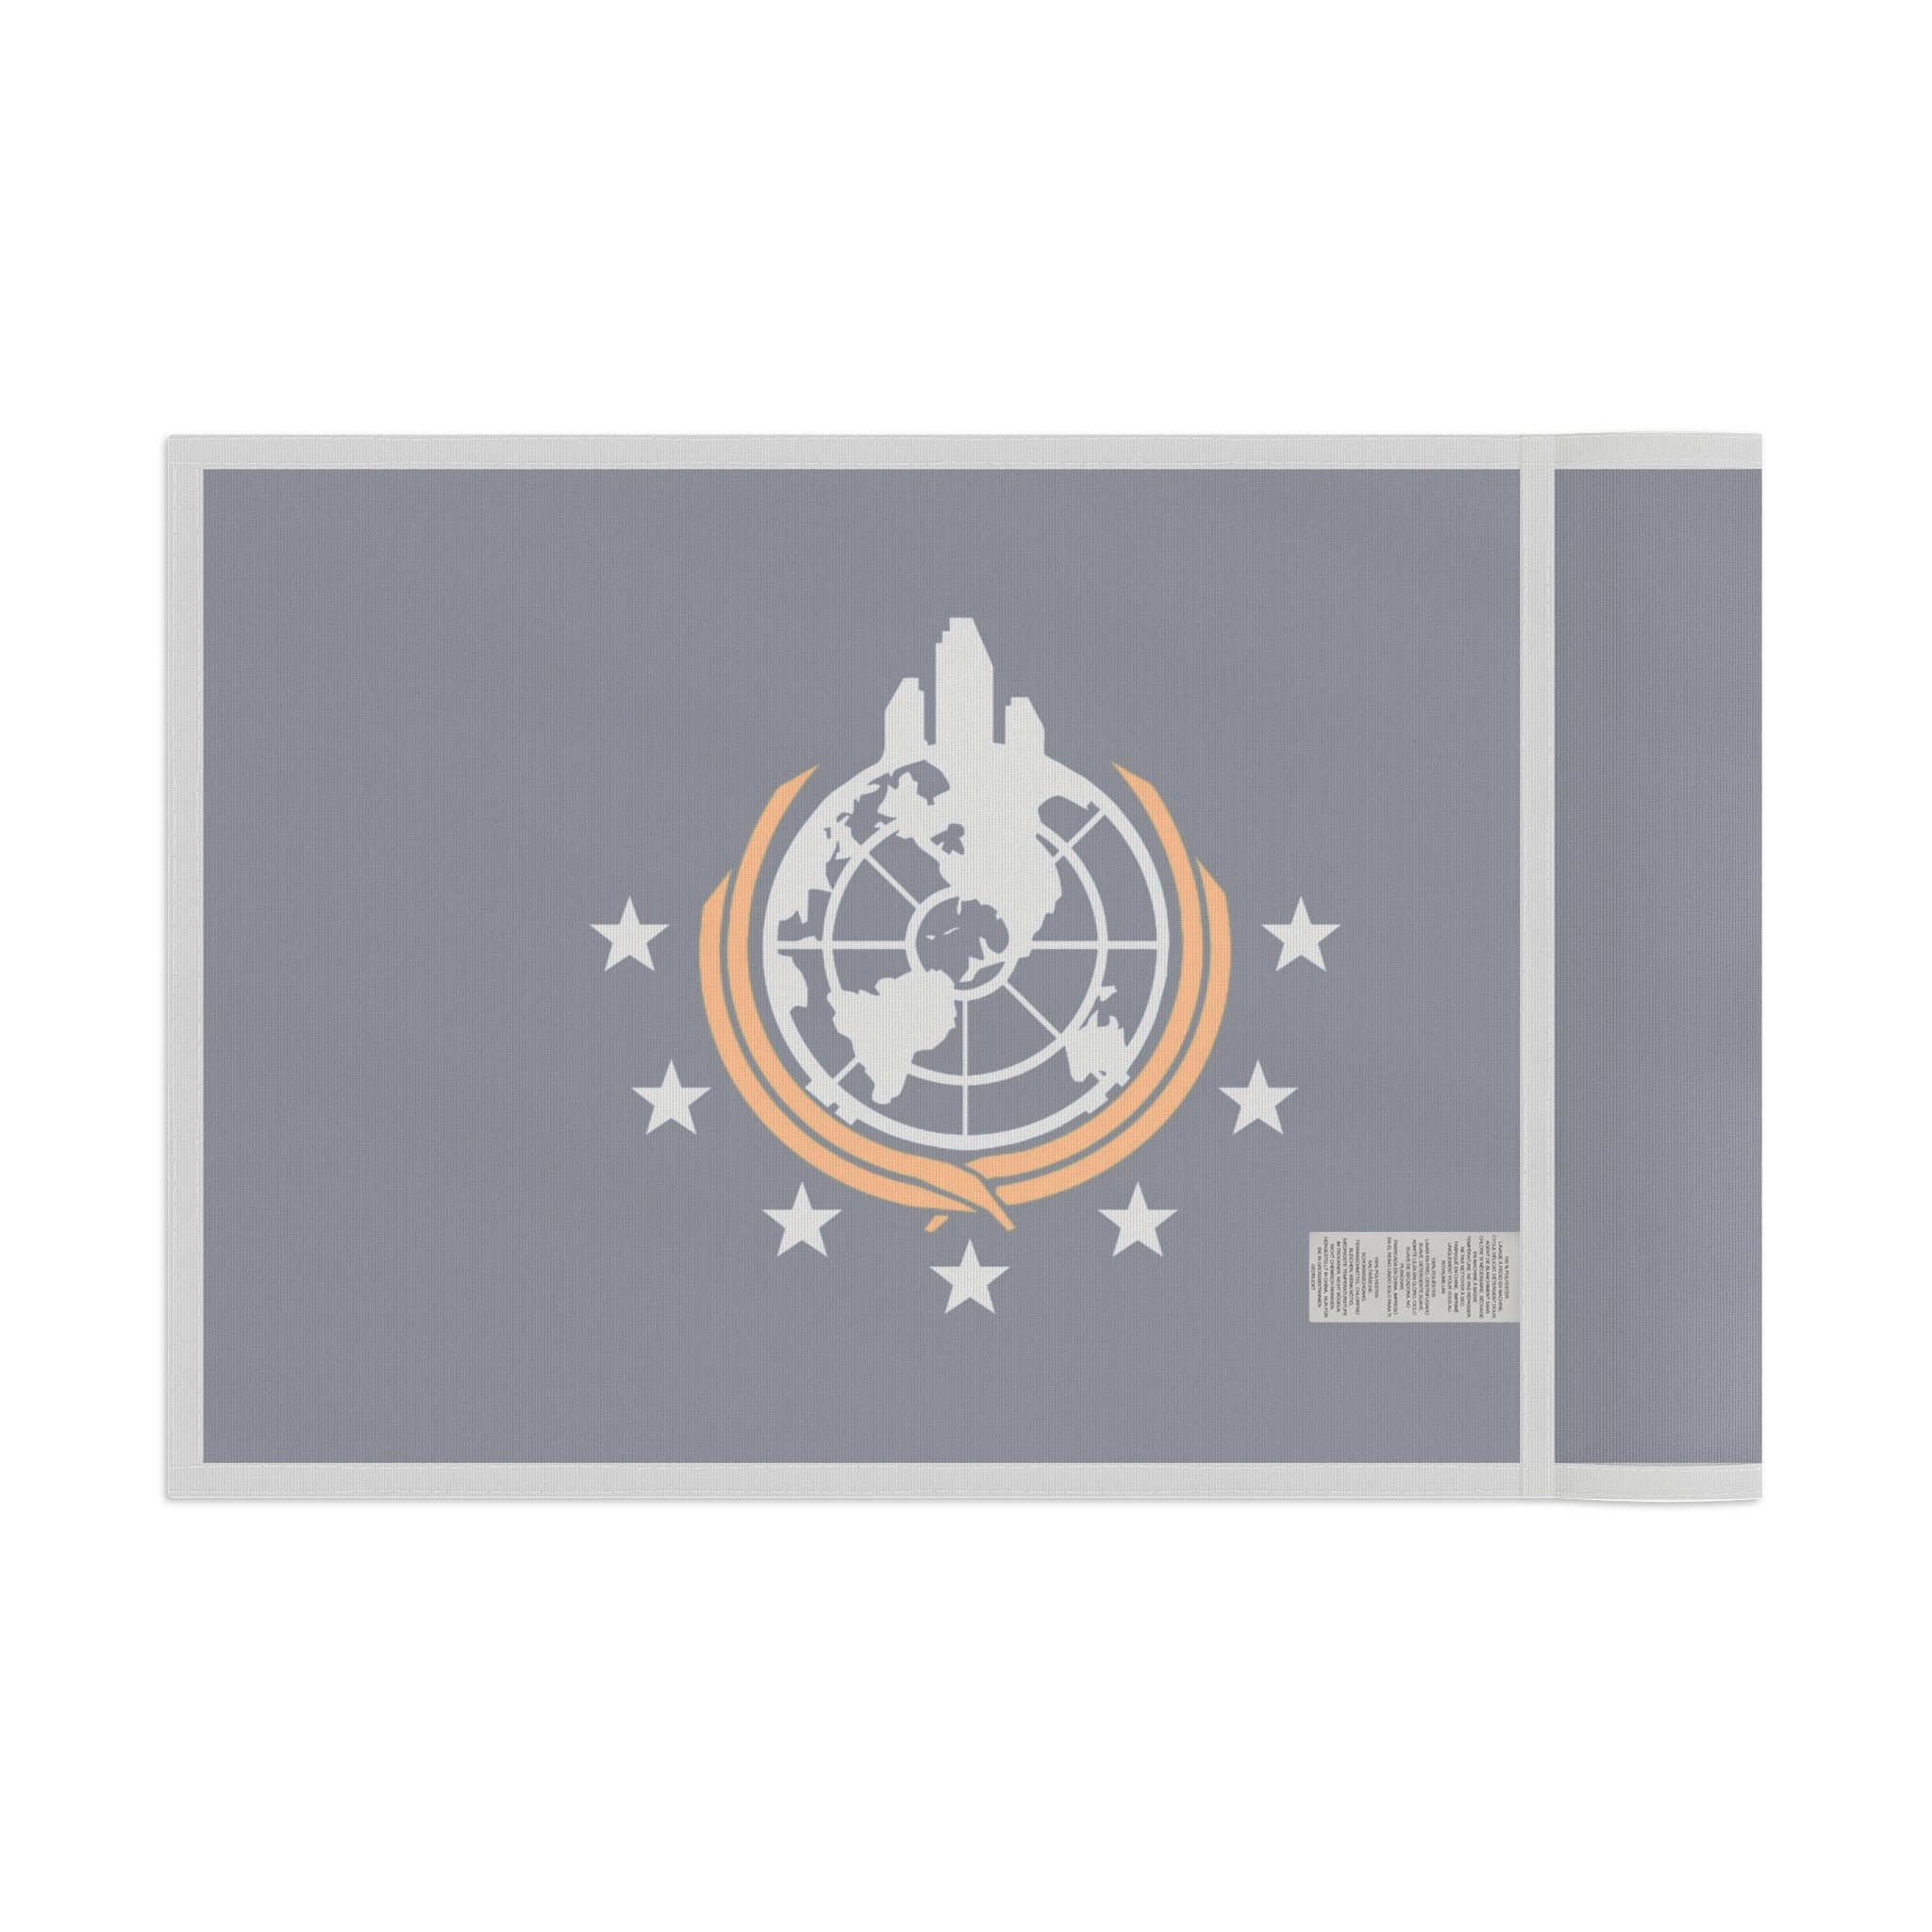 Helldivers 2 Superearth Flag Helldiver Super Earth Funny Gift For Him Her Gamer Game Flags Banner Logo Cool Cute Birthday Christmas Valentine's